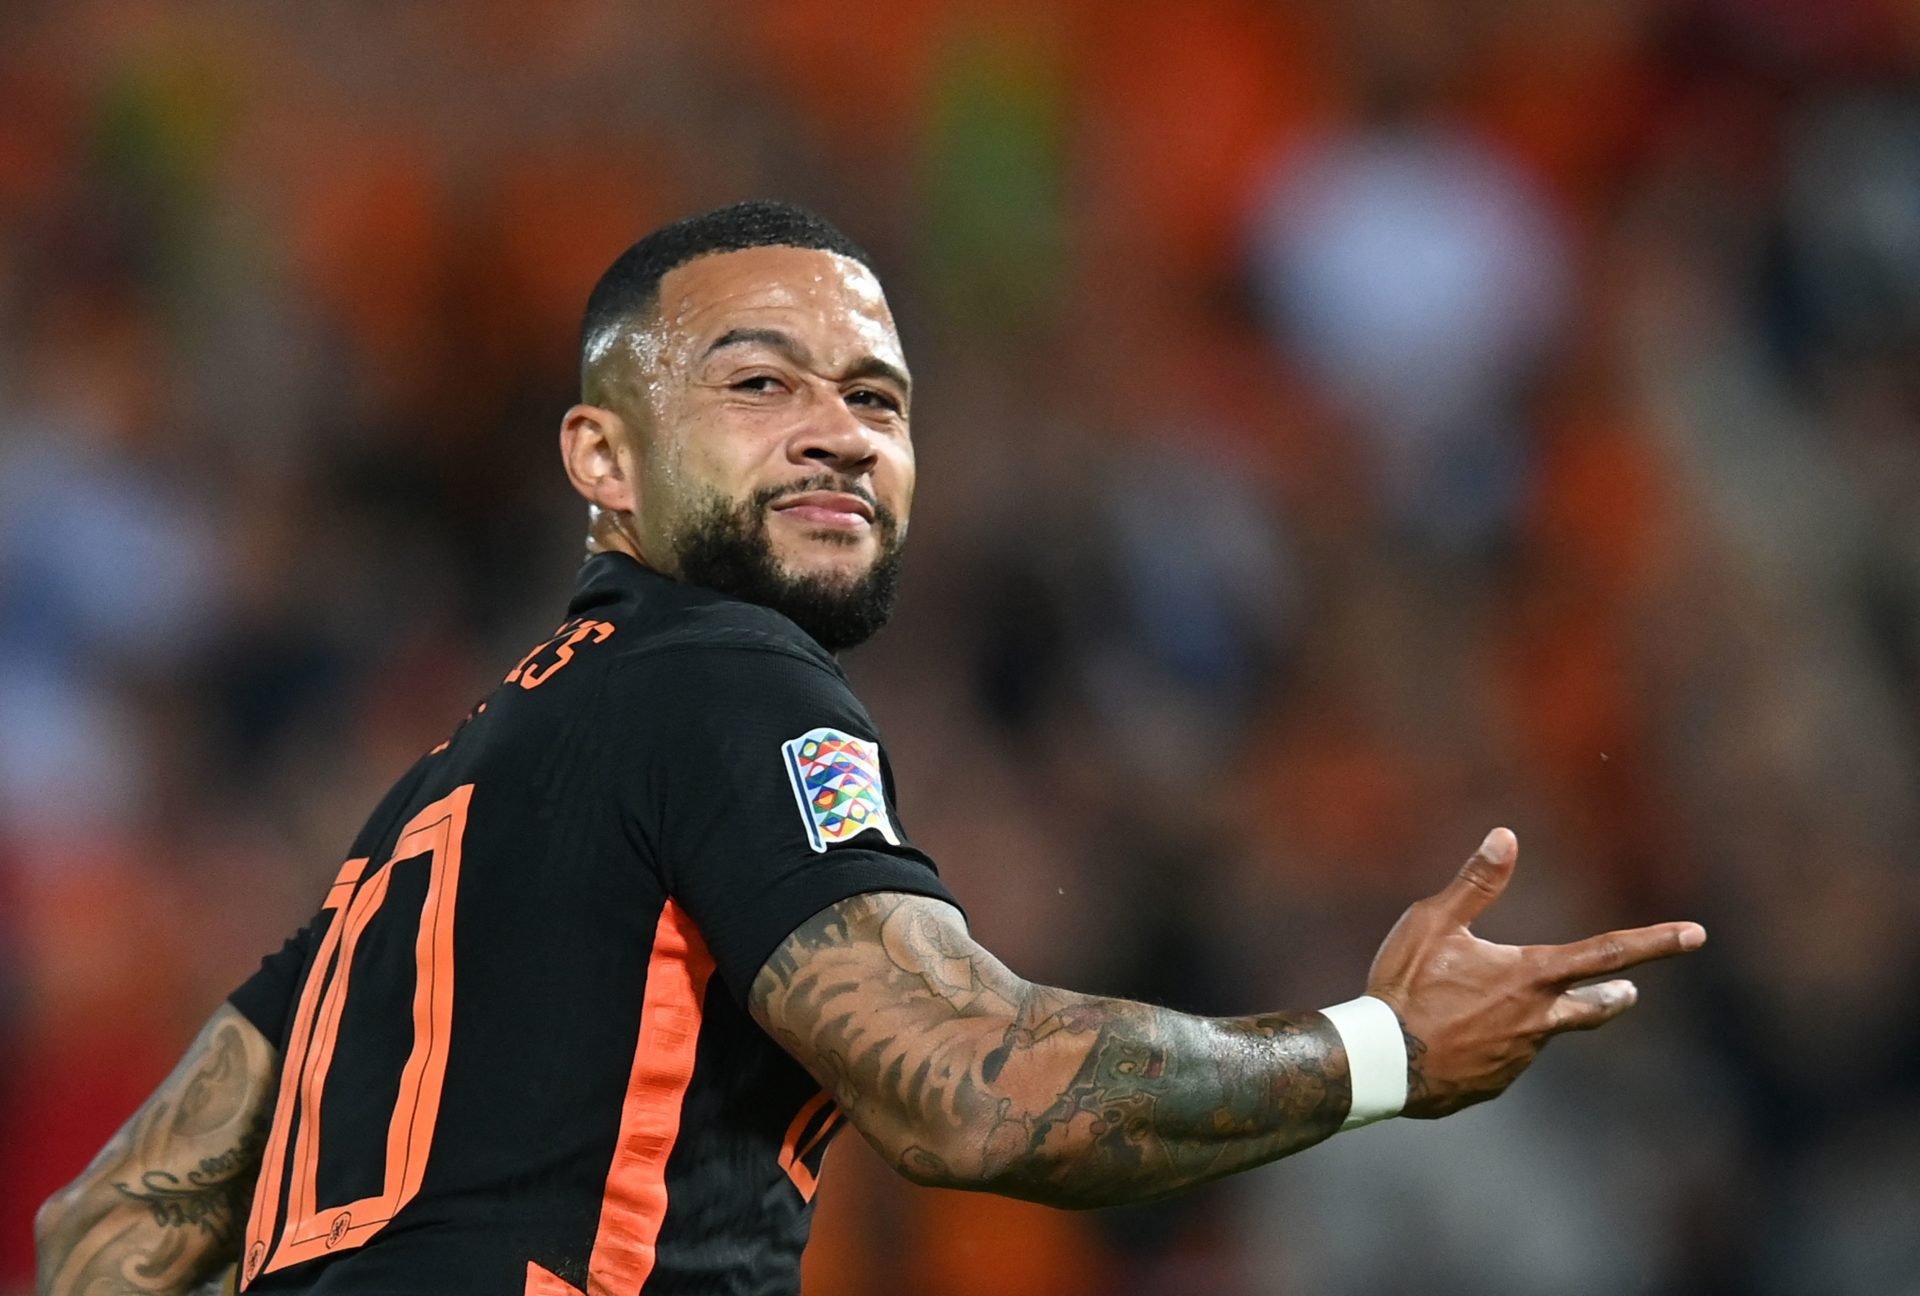 Barça, willing to sell Memphis Depay for more than 20 million euros